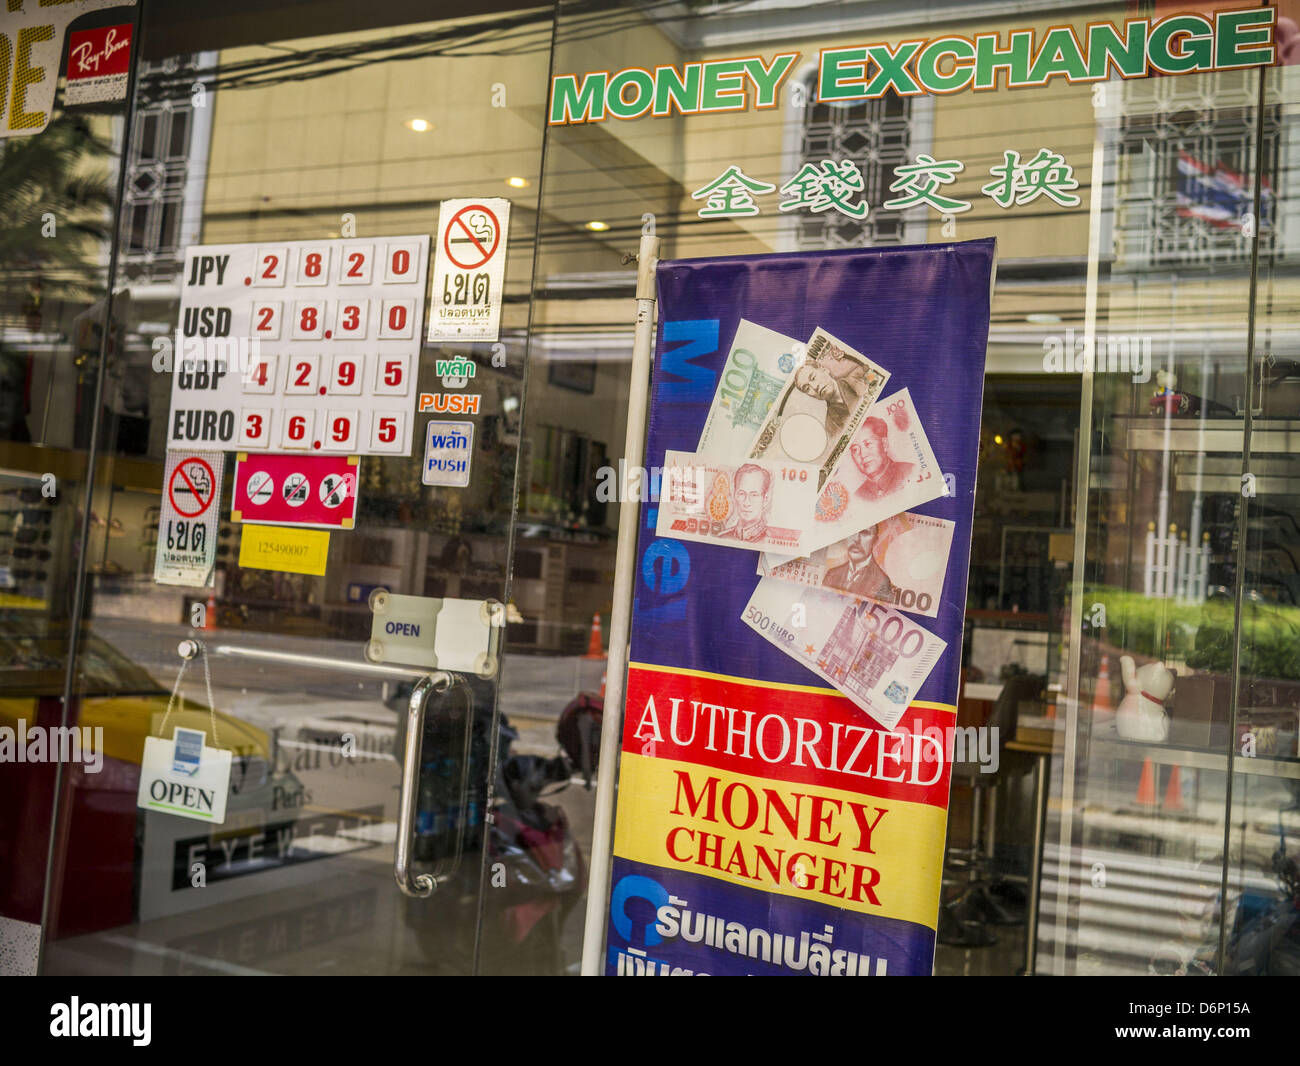 April 22, 2013 - Bangkok, Thailand - The exchange rate is posted in the window of a tourist curio shop that also operates as a currency exchange in Bangkok. The Thai Baht has gained markedly against the US Dollar, the Euro and Pound Sterling in recent months. On Monday, the Baht was trading at 28.57 Baht to 1 US Dollar on Apr. 22. The strengthening Baht means imported goods are cheaper in Thailand, but Thai exports cost more in other countries. It also means tourists and expats who live in Thailand have less money to spend as their currencies buy fewer Baht. The baht has risen 5 percent agains Stock Photo